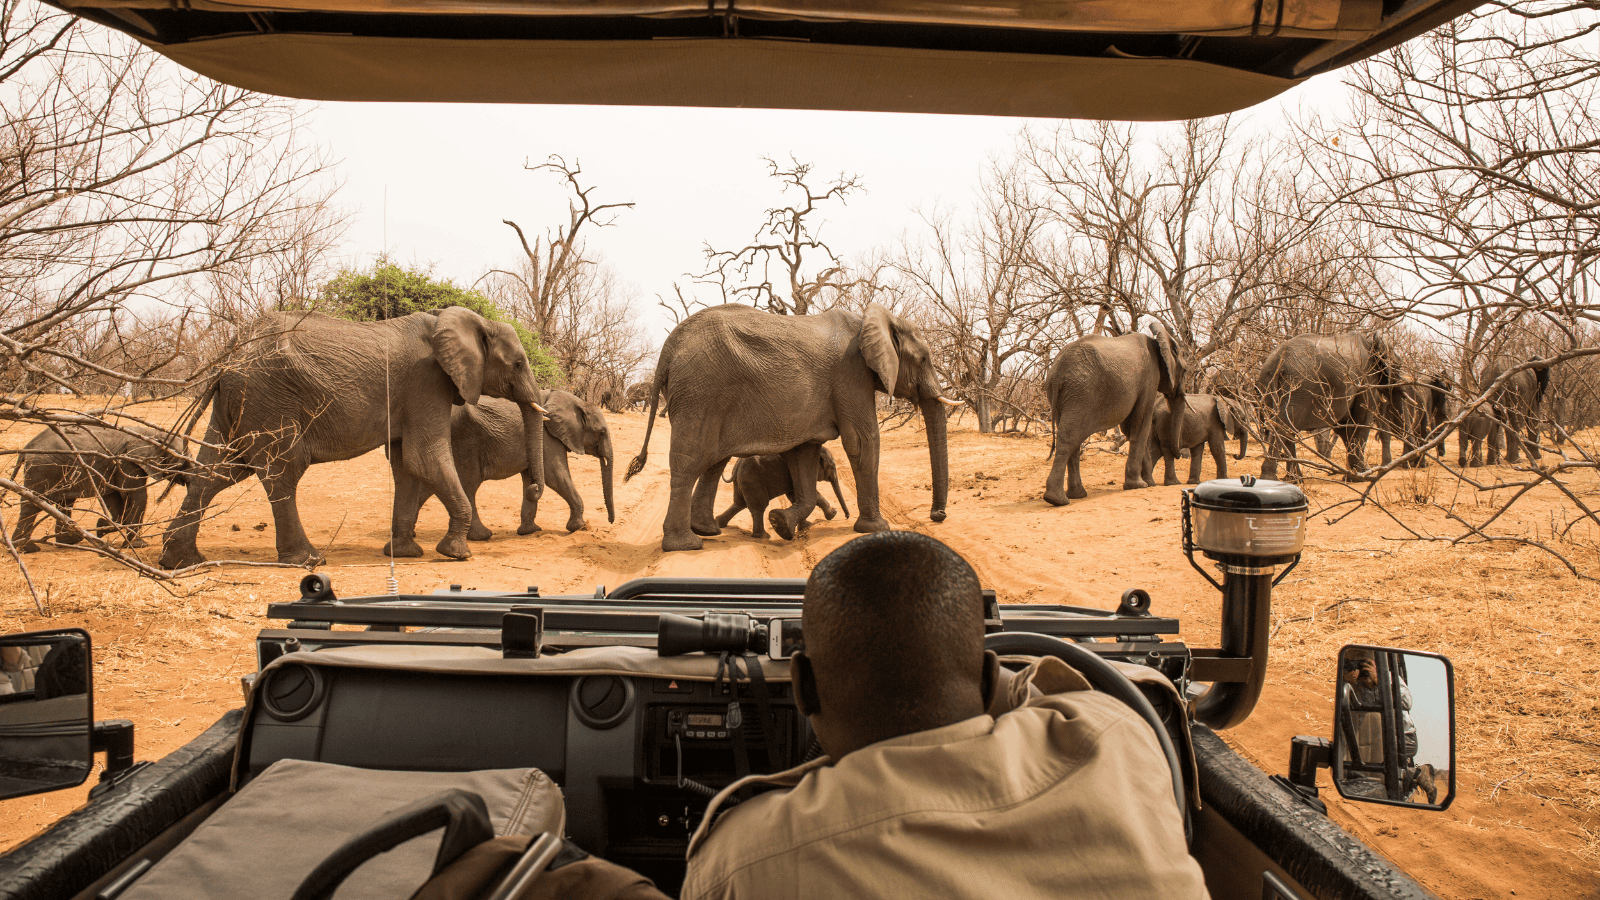 <p><a href="https://www.compassodyssey.travel/tour/6-day-zambezi-chobe-safari/" rel="nofollow external noopener noreferrer">Compass Odyssey’s</a> private 6-Day Zambezi-Chobe Safari lets you craft the perfect Africa itinerary. It’s a one-of-a-kind voyage featuring a <a href="https://whatthefab.com/luxury-river-cruises.html" rel="follow">river cruise</a> down the Zambezi, walking safaris, and scenic drives through Chobe National Park. </p><p>You can personalize the trip to include additional days and custom activities. However you want to spend your time in Africa, Compass Odyssey can make it happen. </p>